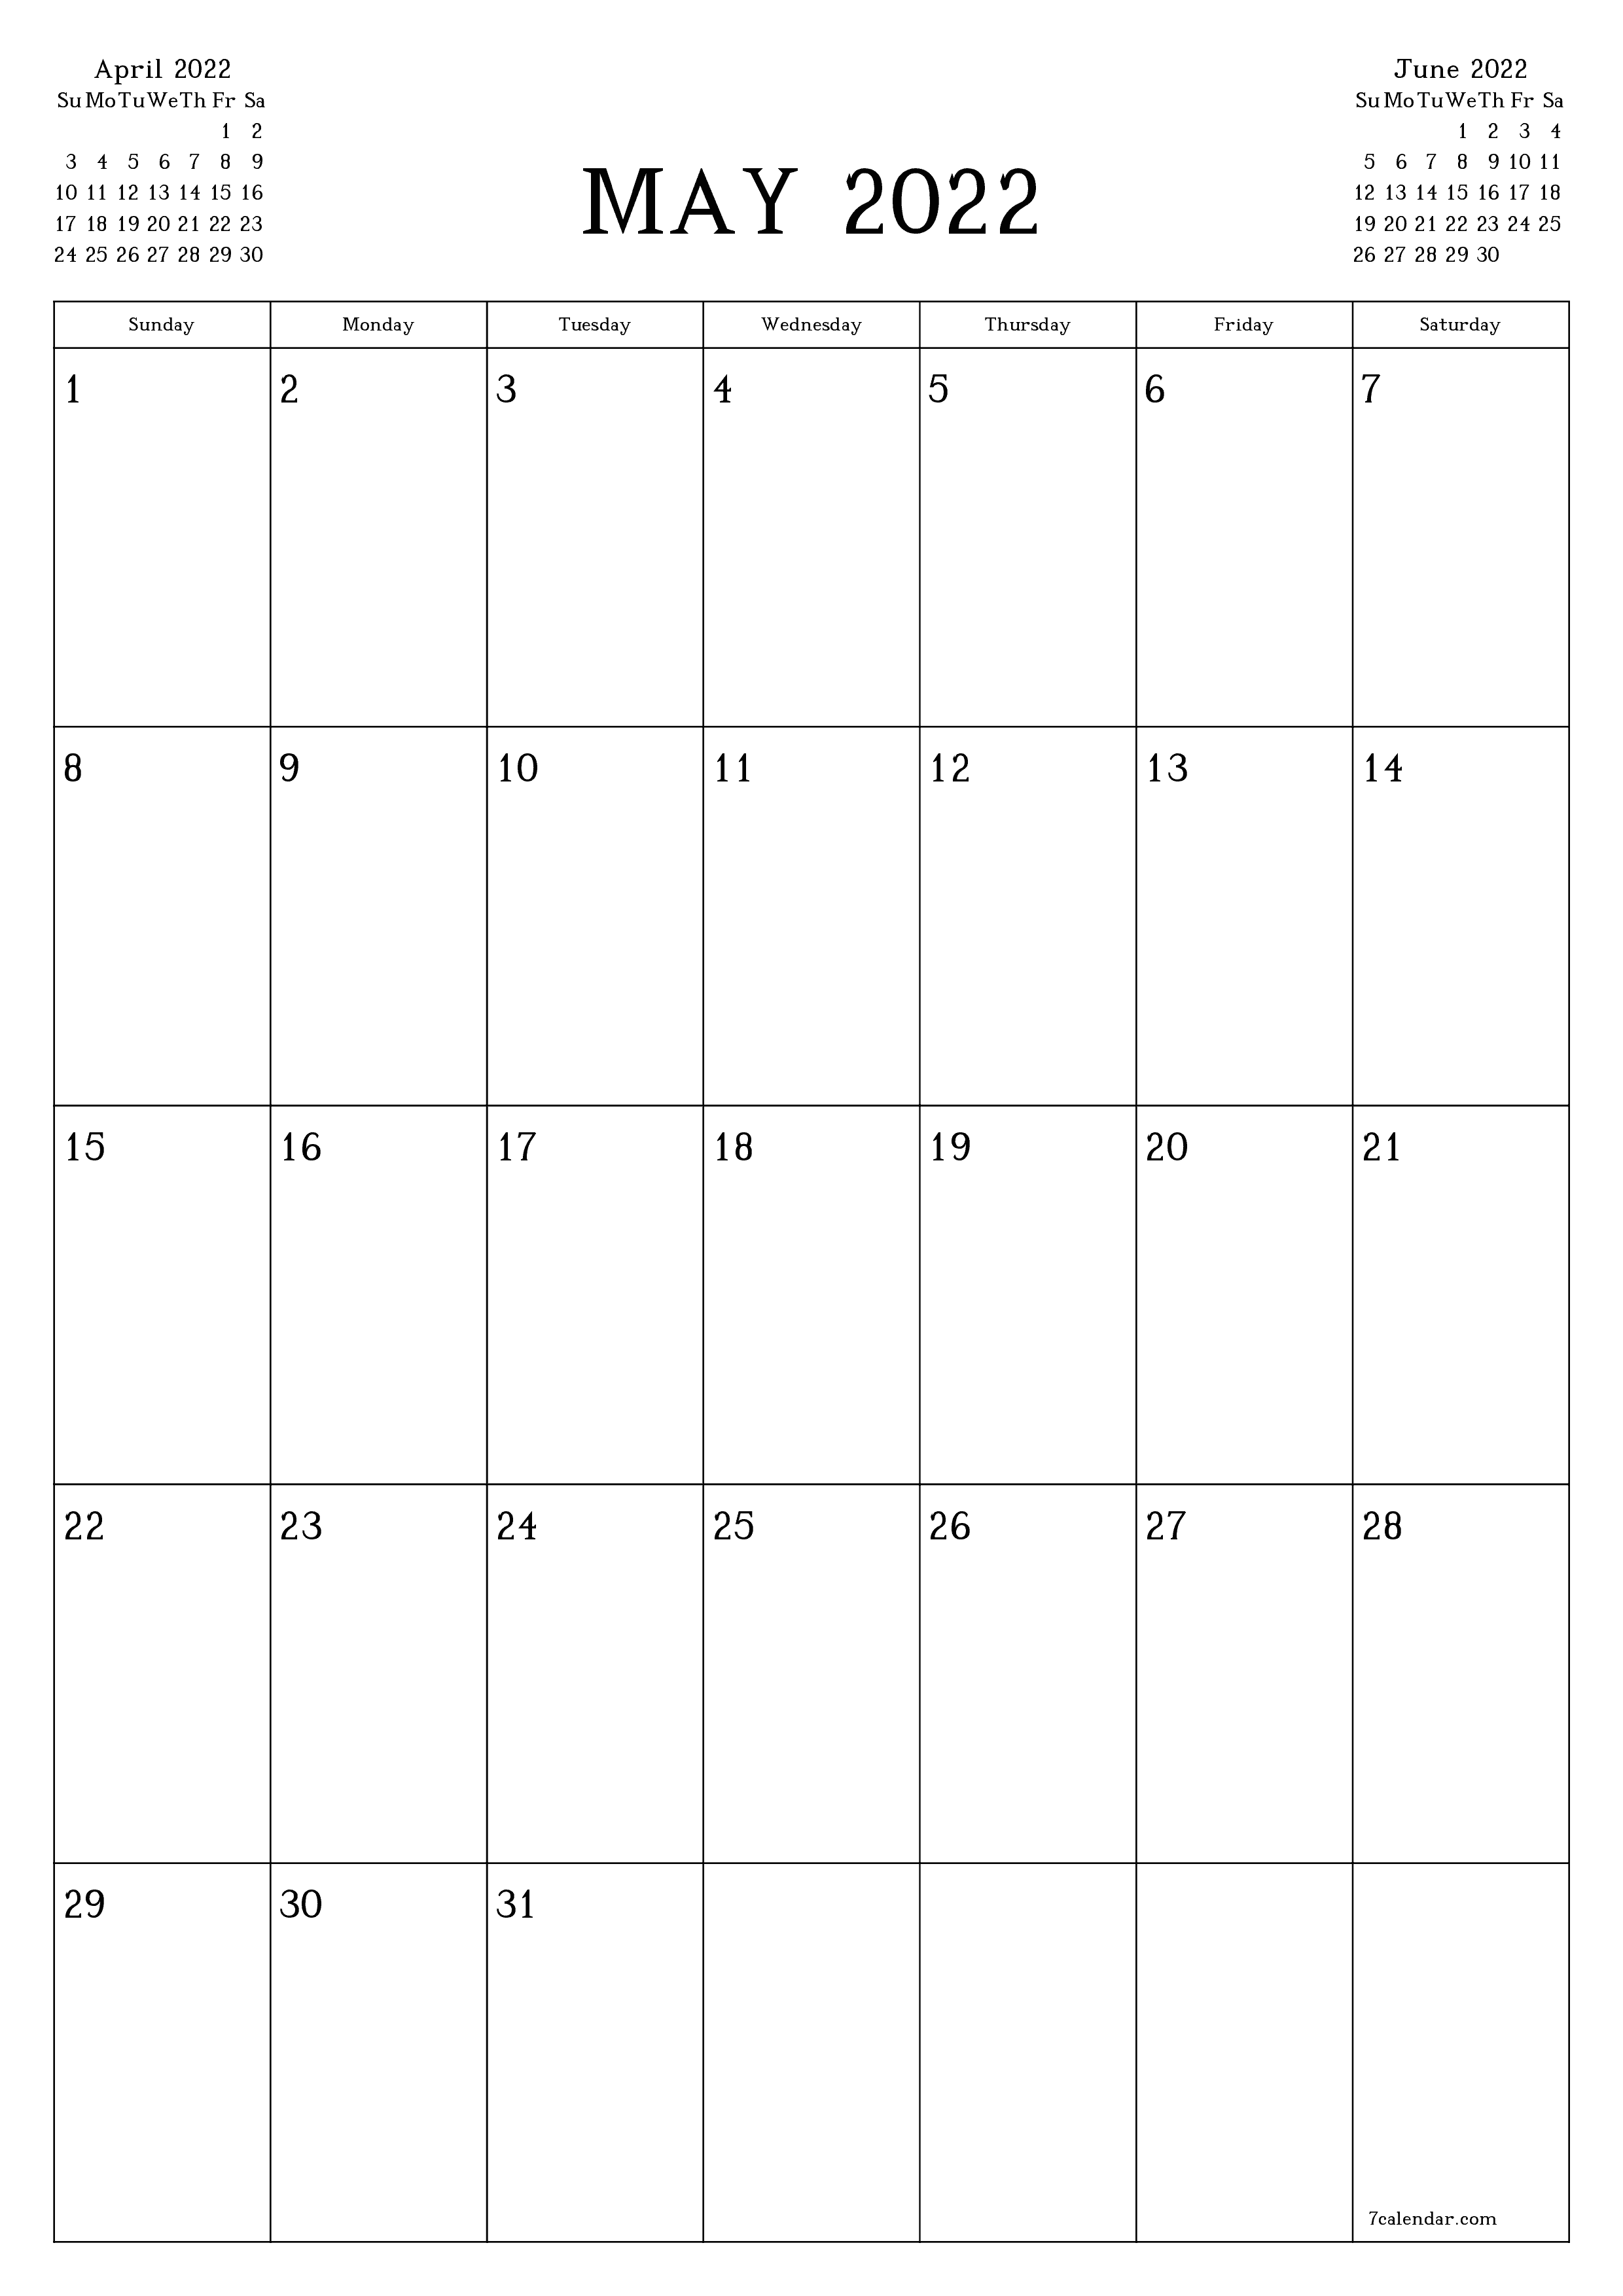 Blank monthly printable calendar and planner for month May 2022 with notes save and print to PDF PNG English - 7calendar.com